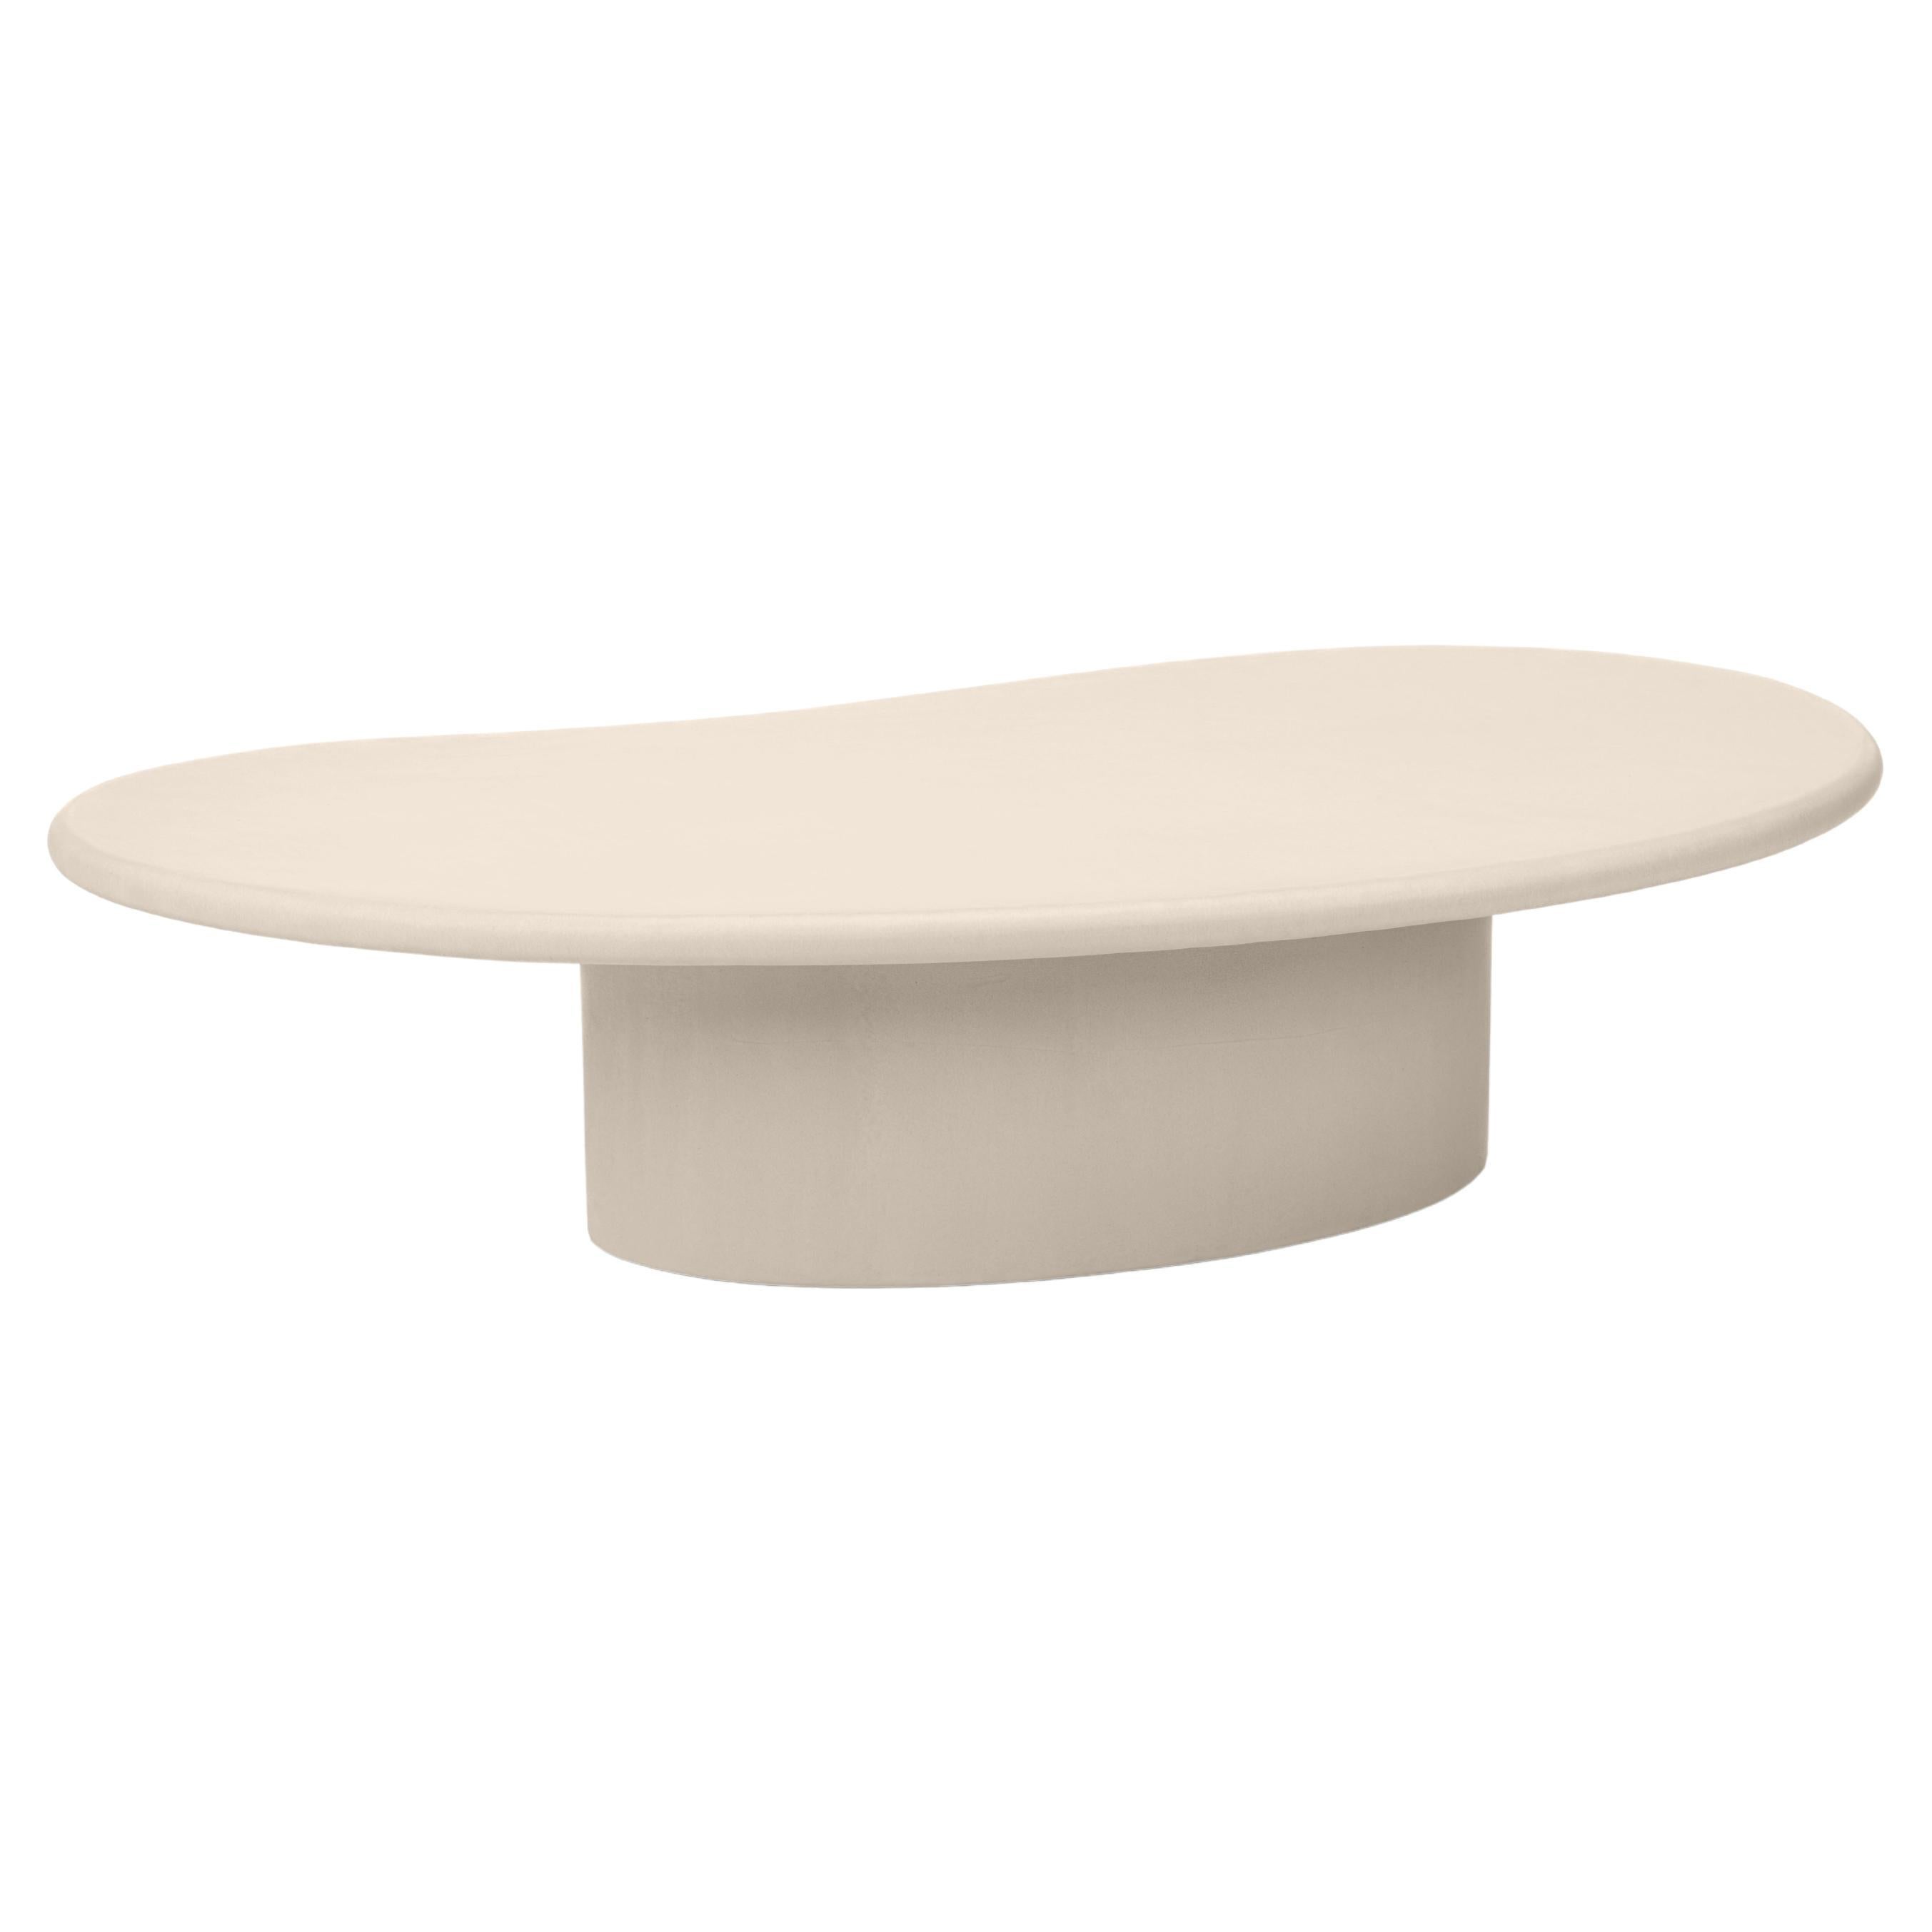 Organic Shaped Mortex Coffee Table "Angus" 130 BM32.5 by Isabelle Beaumont For Sale